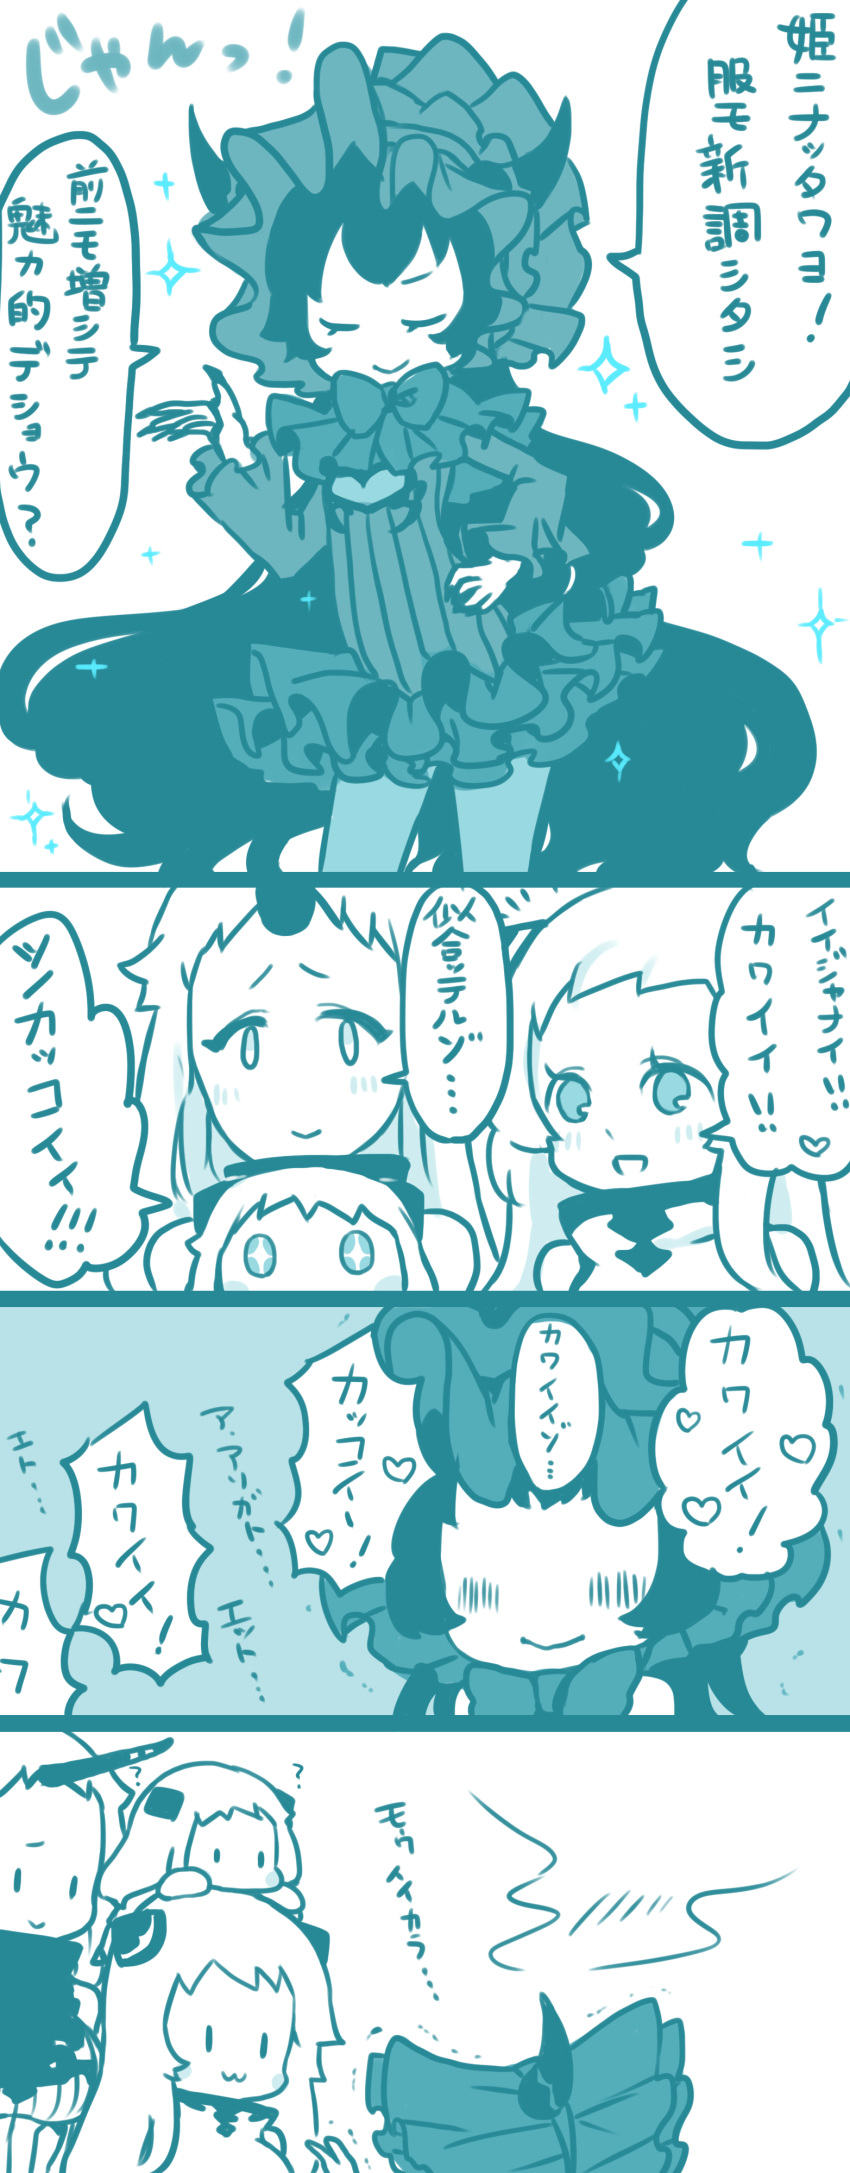 4girls 4koma :3 :d absurdres airfield_hime blush chibi comic embarrassed gothic_lolita hairband highres horn horns isolated_island_hime kantai_collection kobone lolita_fashion lolita_hairband mittens monochrome multiple_girls northern_ocean_hime open_mouth seaport_hime smile translation_request